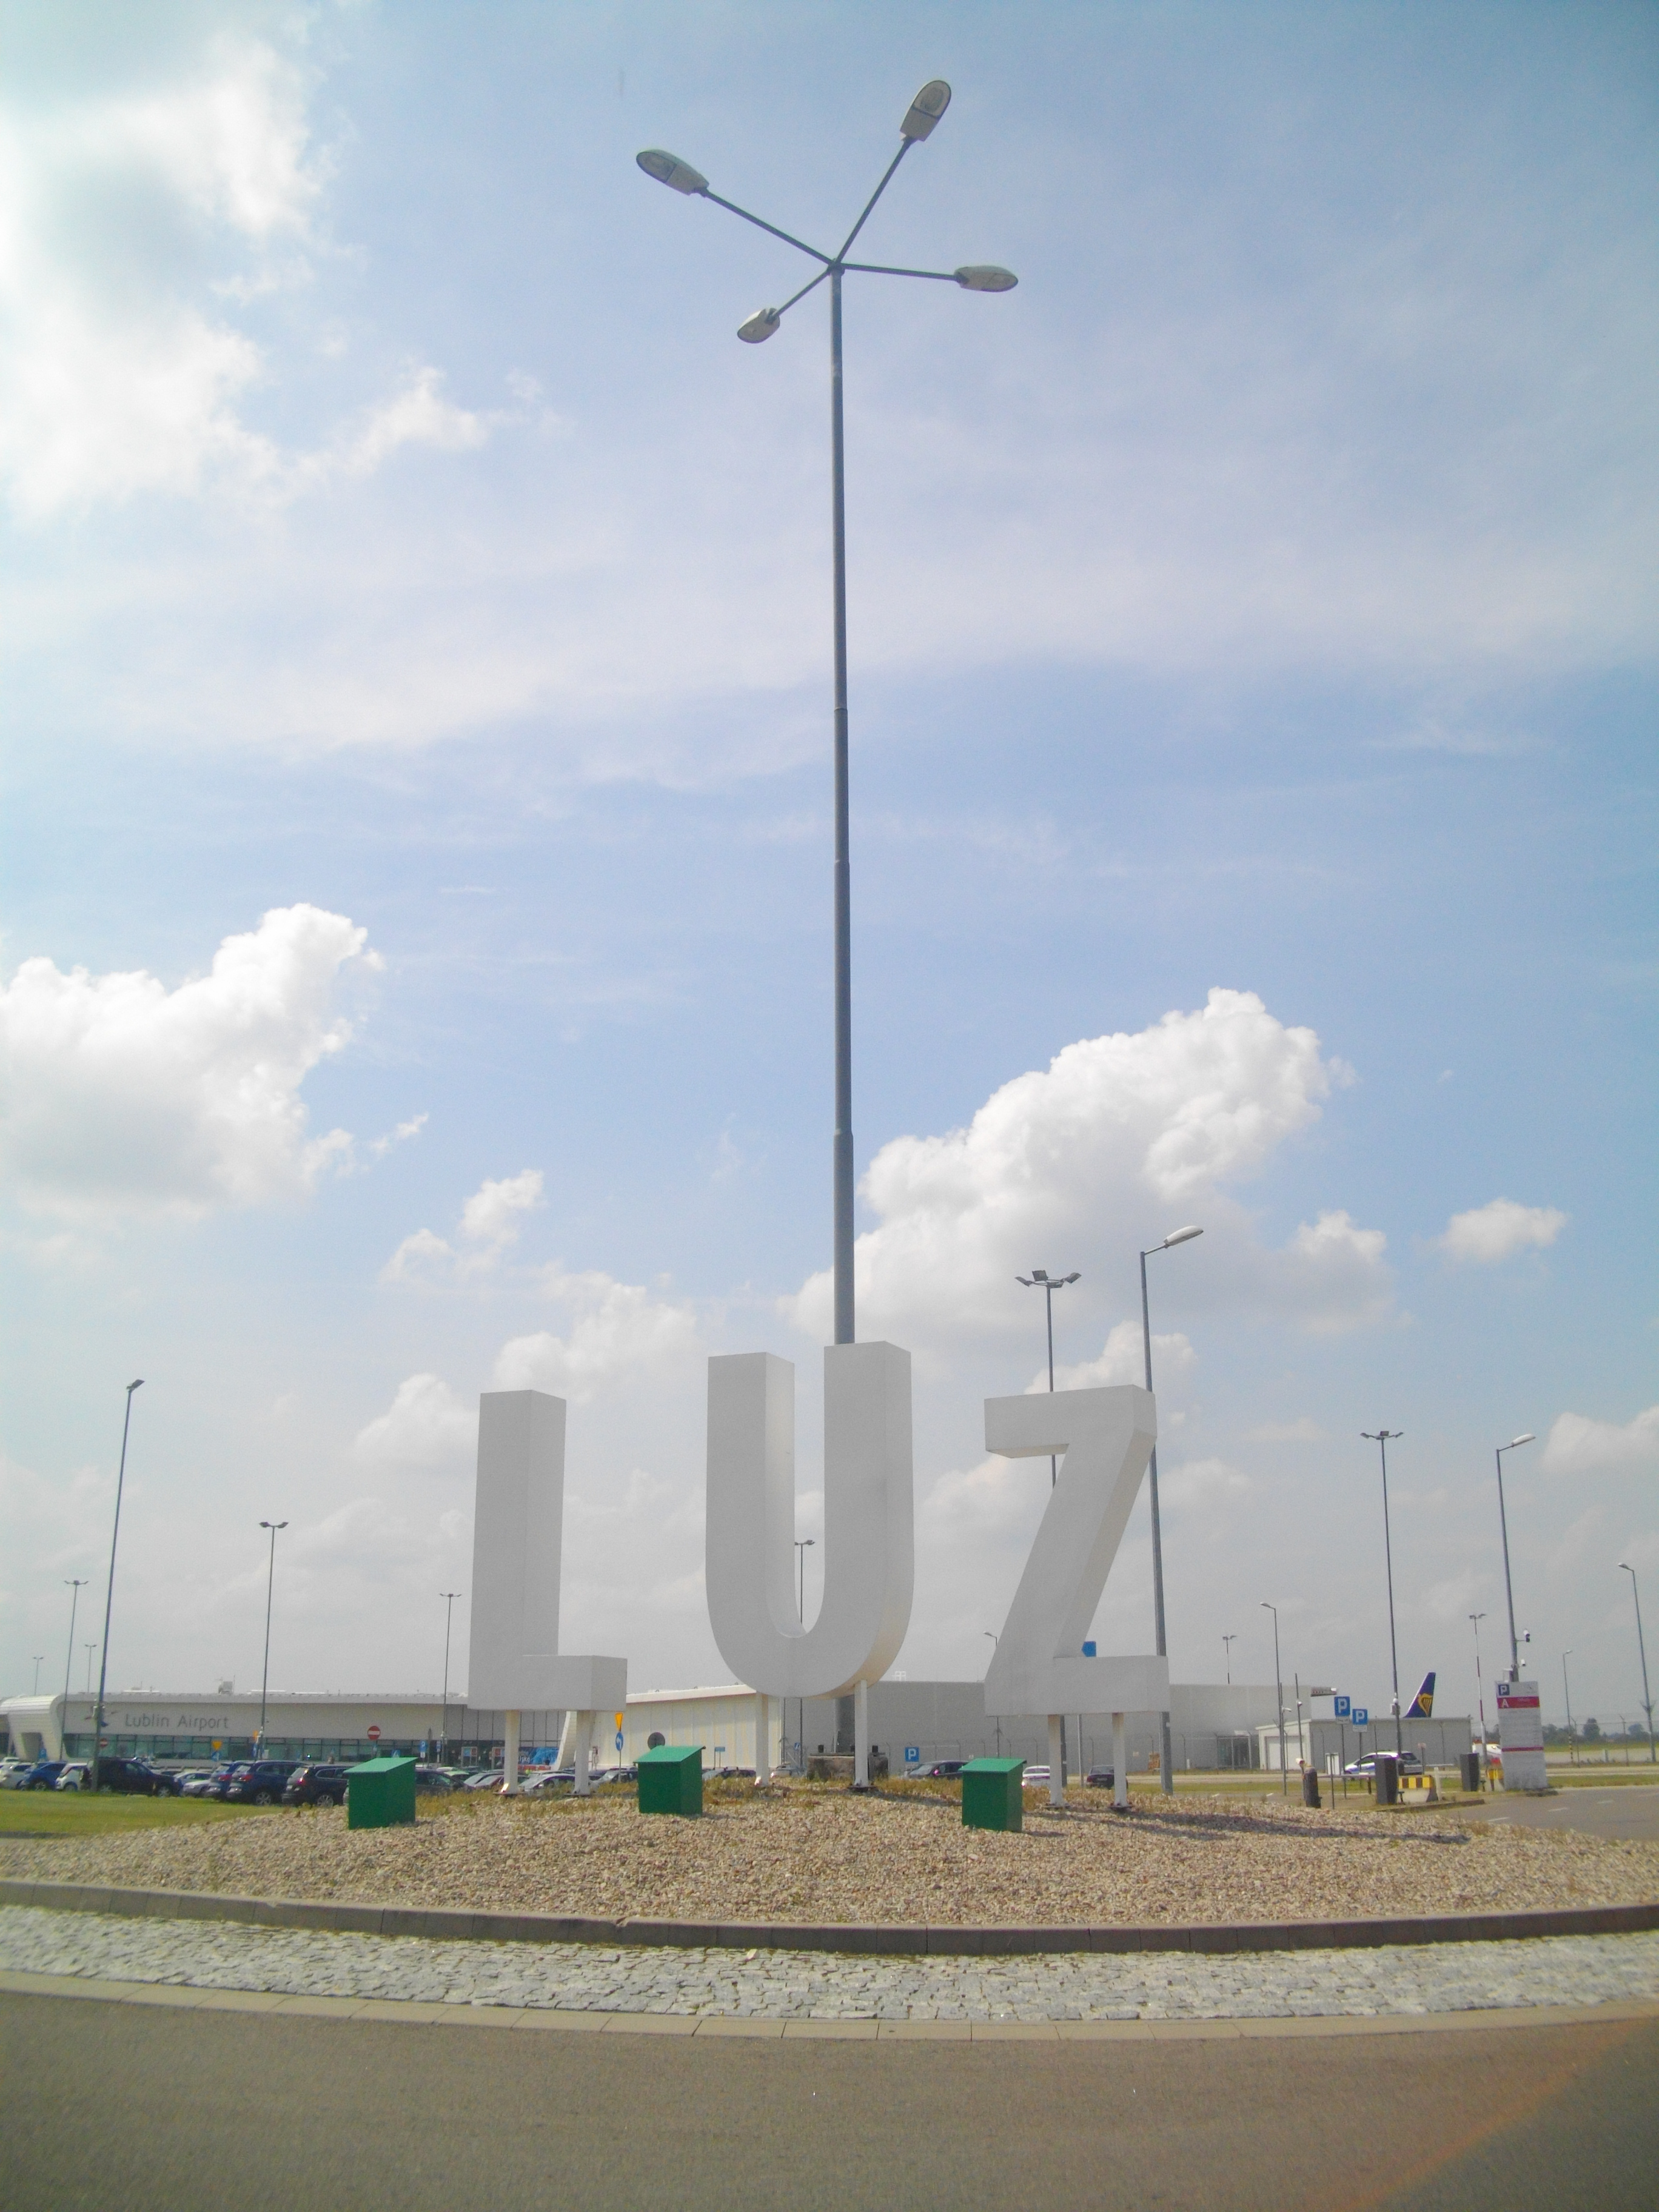 Lublin Airport LUZ sign